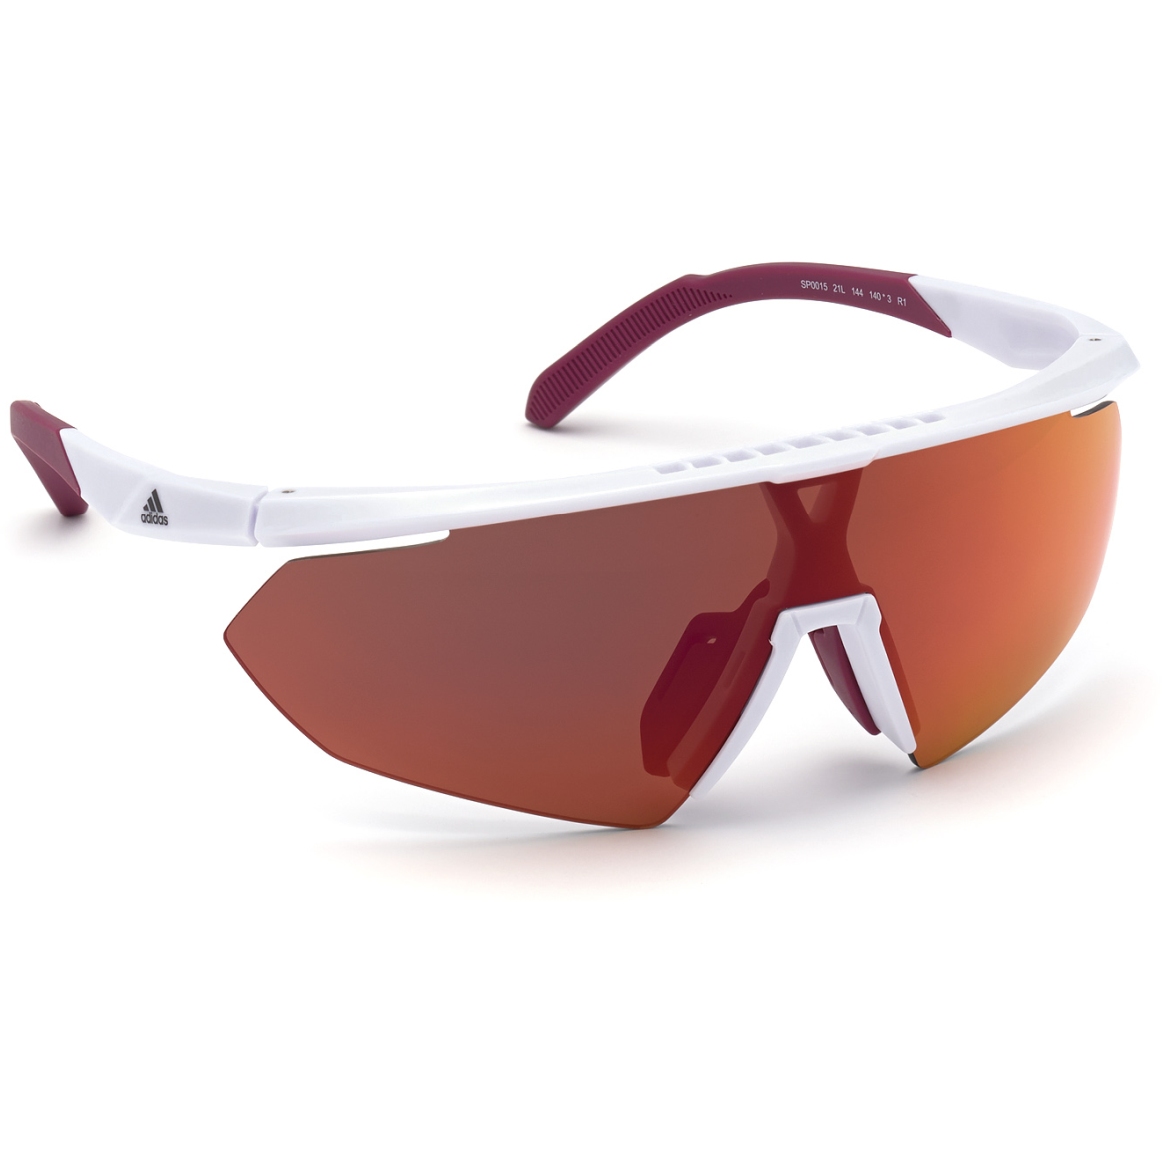 Picture of adidas Sp0015 Injected Sports Sunglasses - White / Contrast Mirror Red Pink + Orange